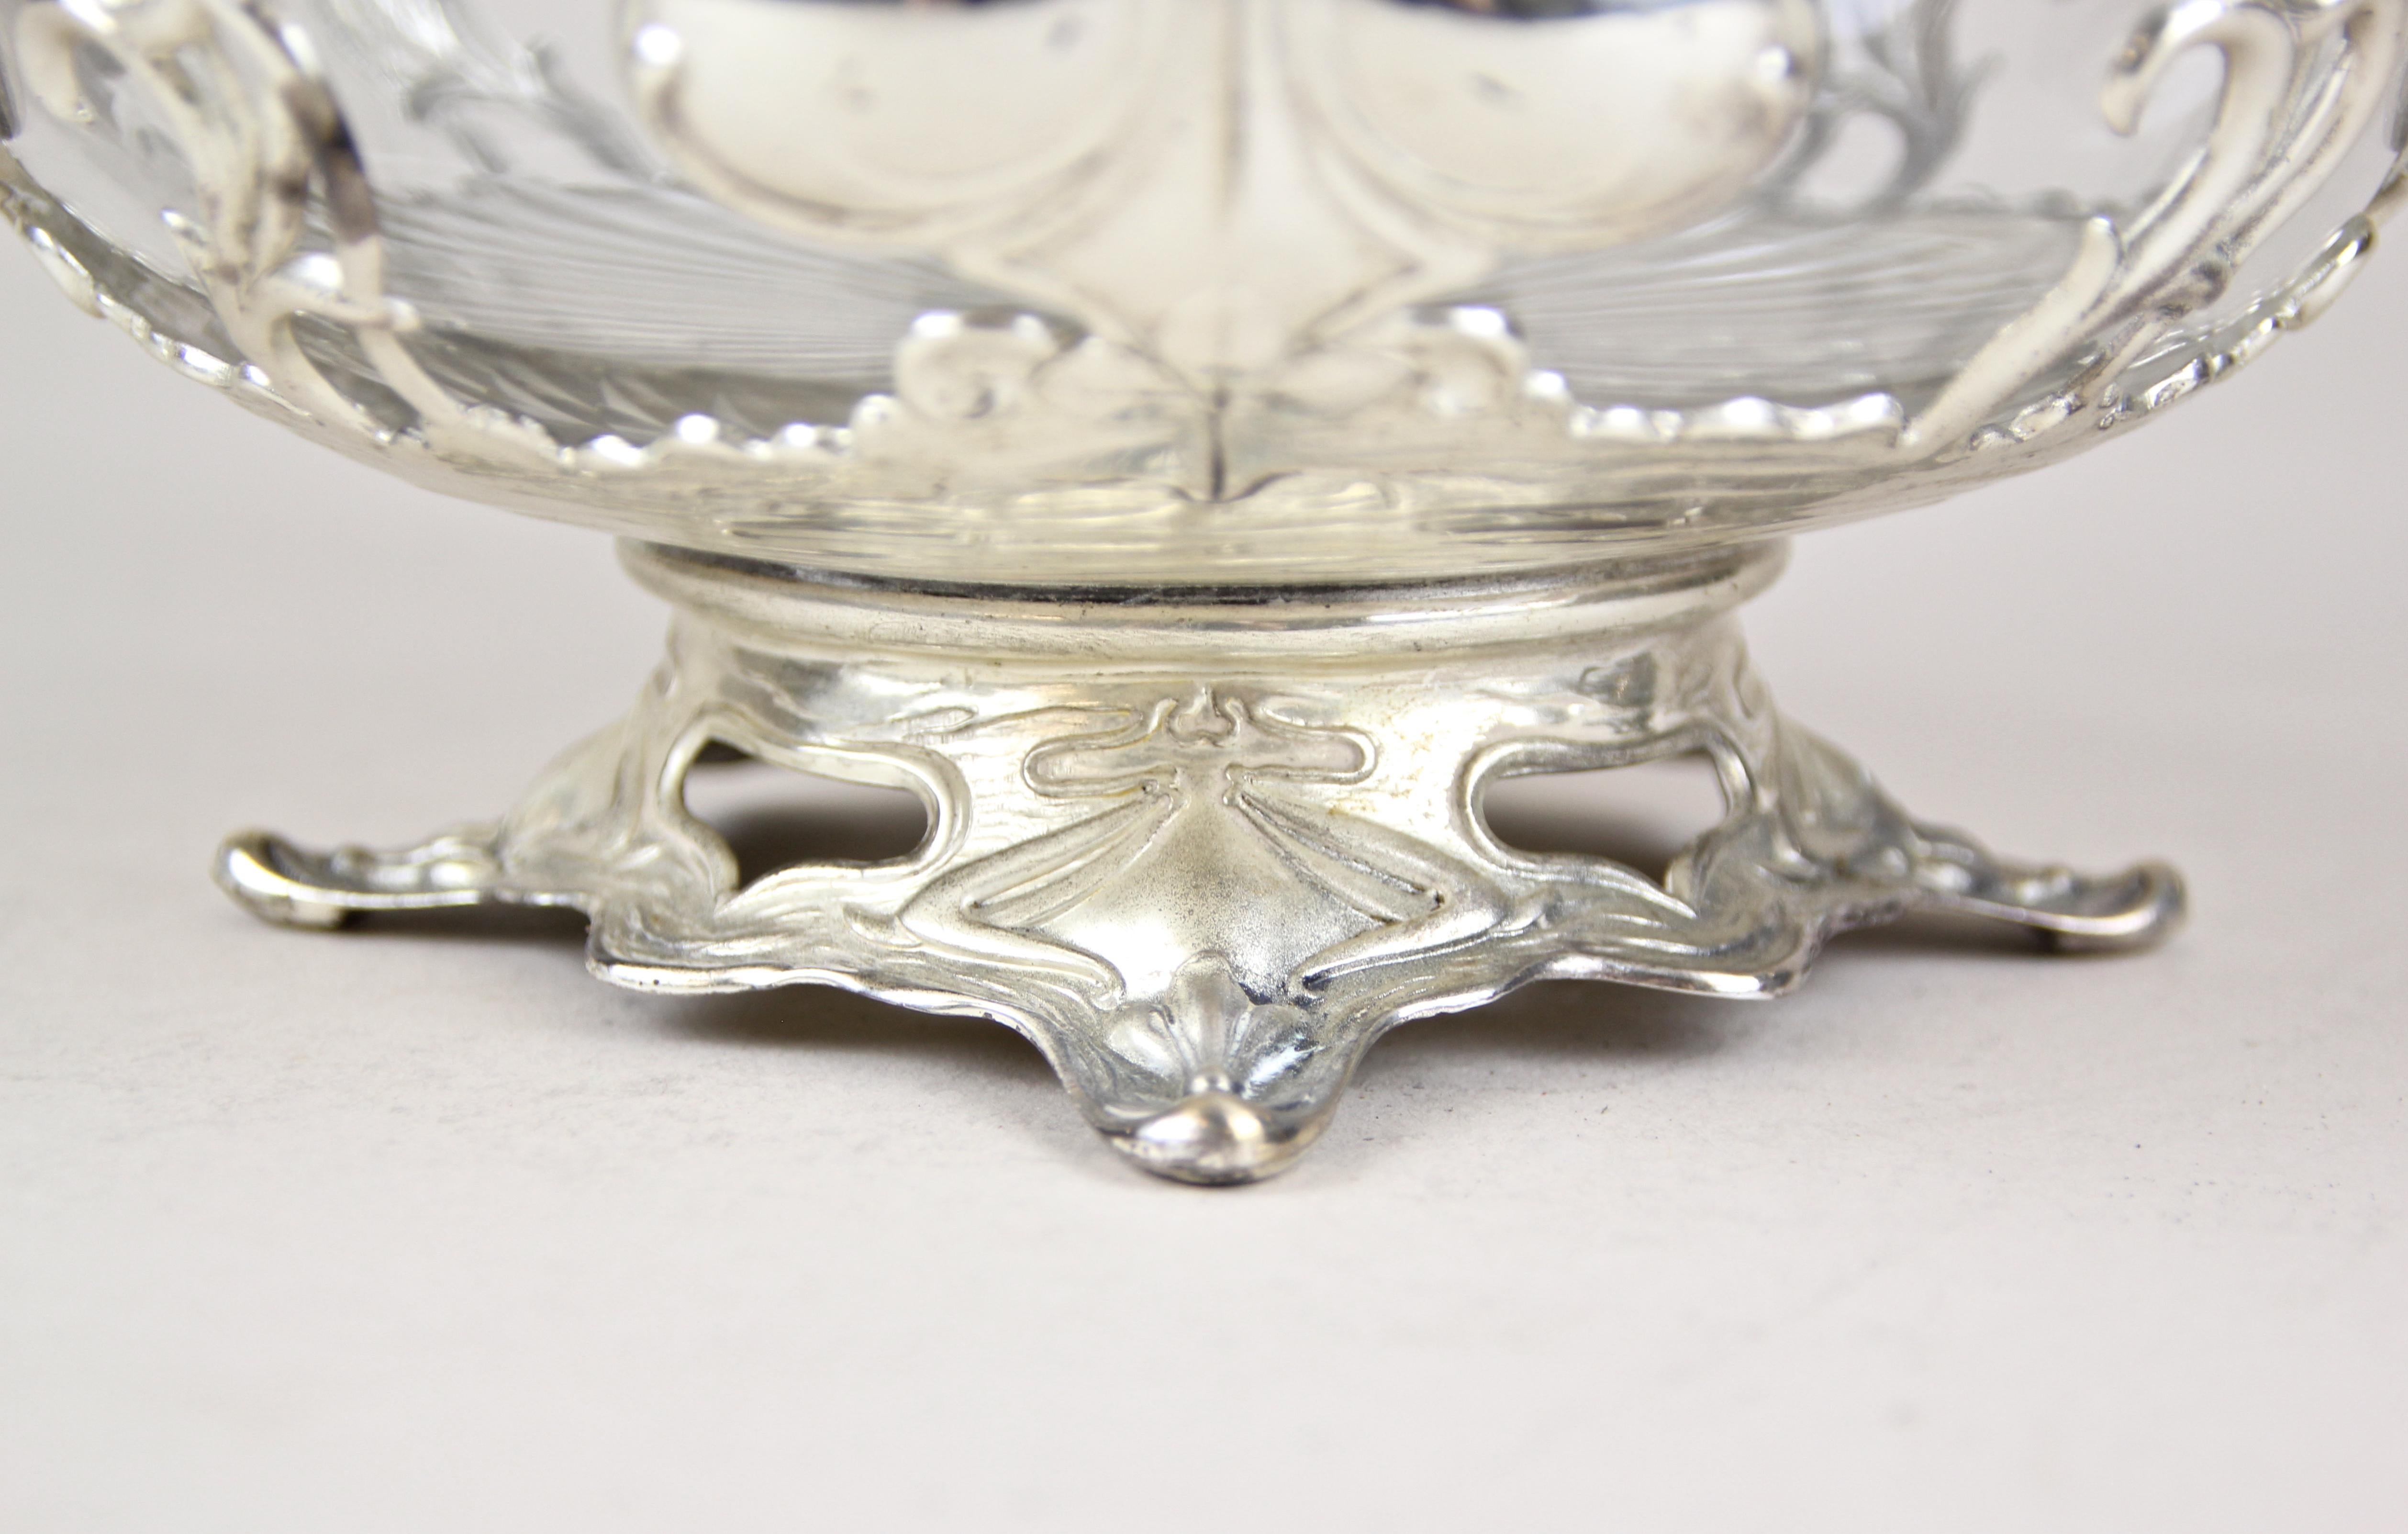 20th Century Silvered Centerpiece with Cut Glass Bowl by A. Köhler & Cie WMF, Vienna